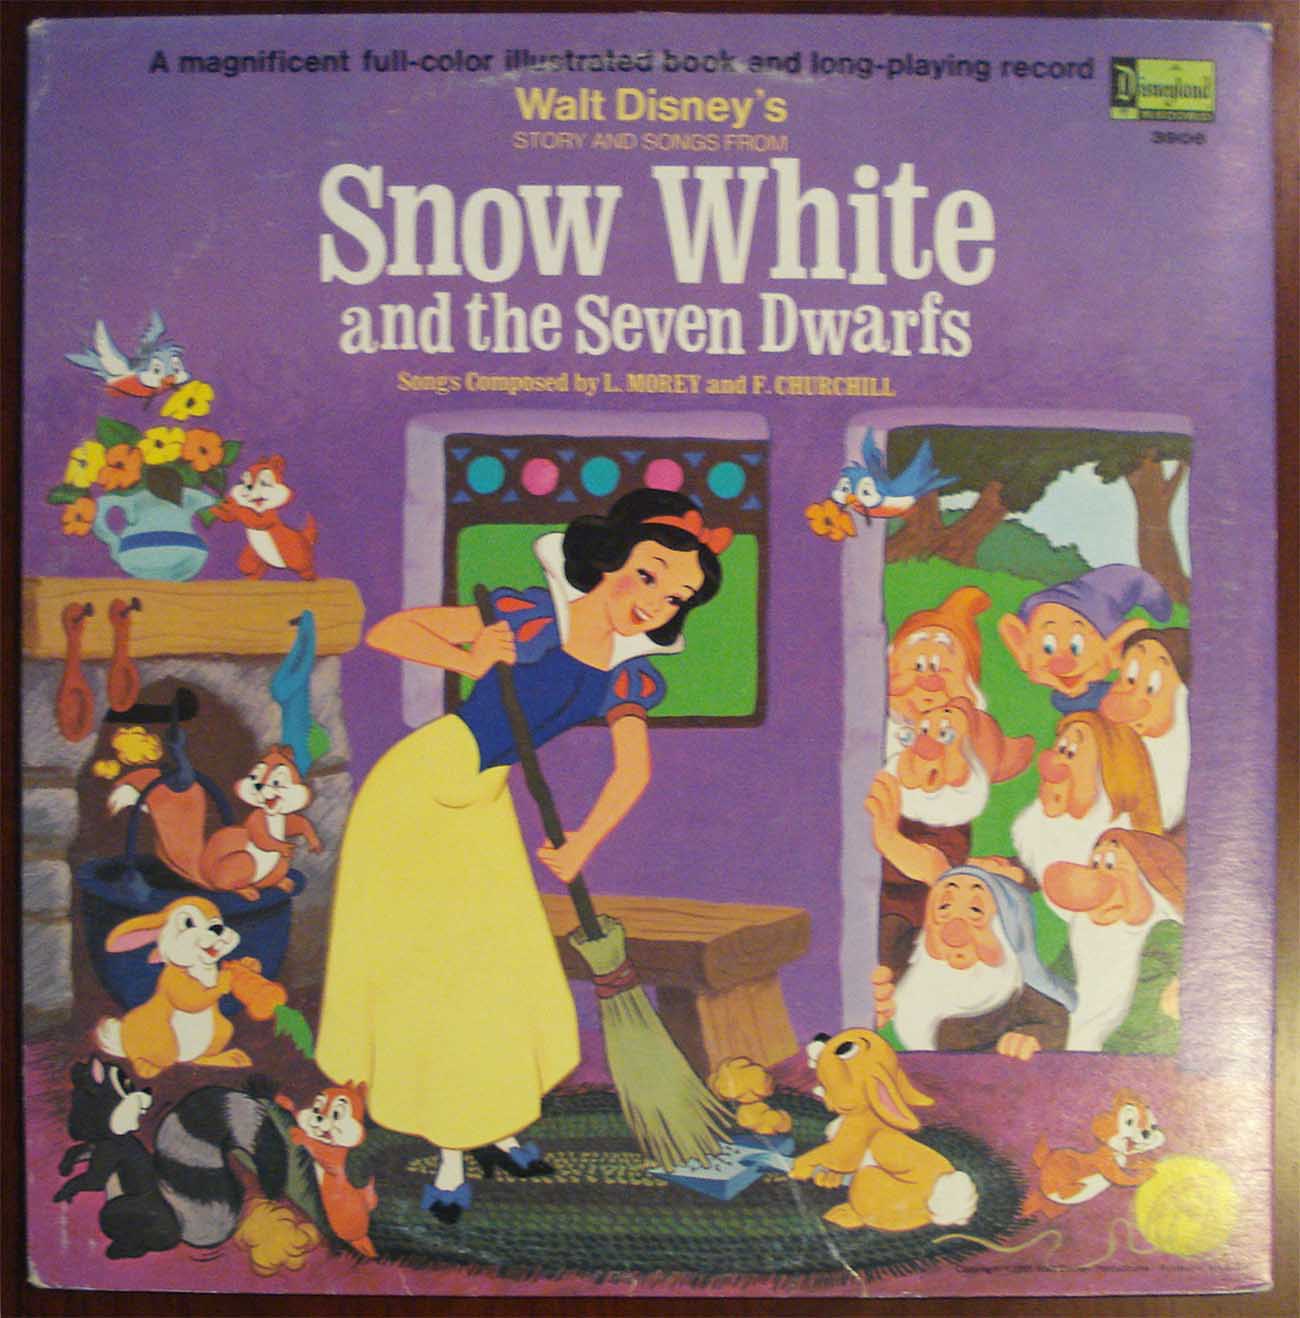 Walt Disney's Story And Songs From Snow White And The Seven Dwarfs (1969) Vinyl LP 33rpm 3906